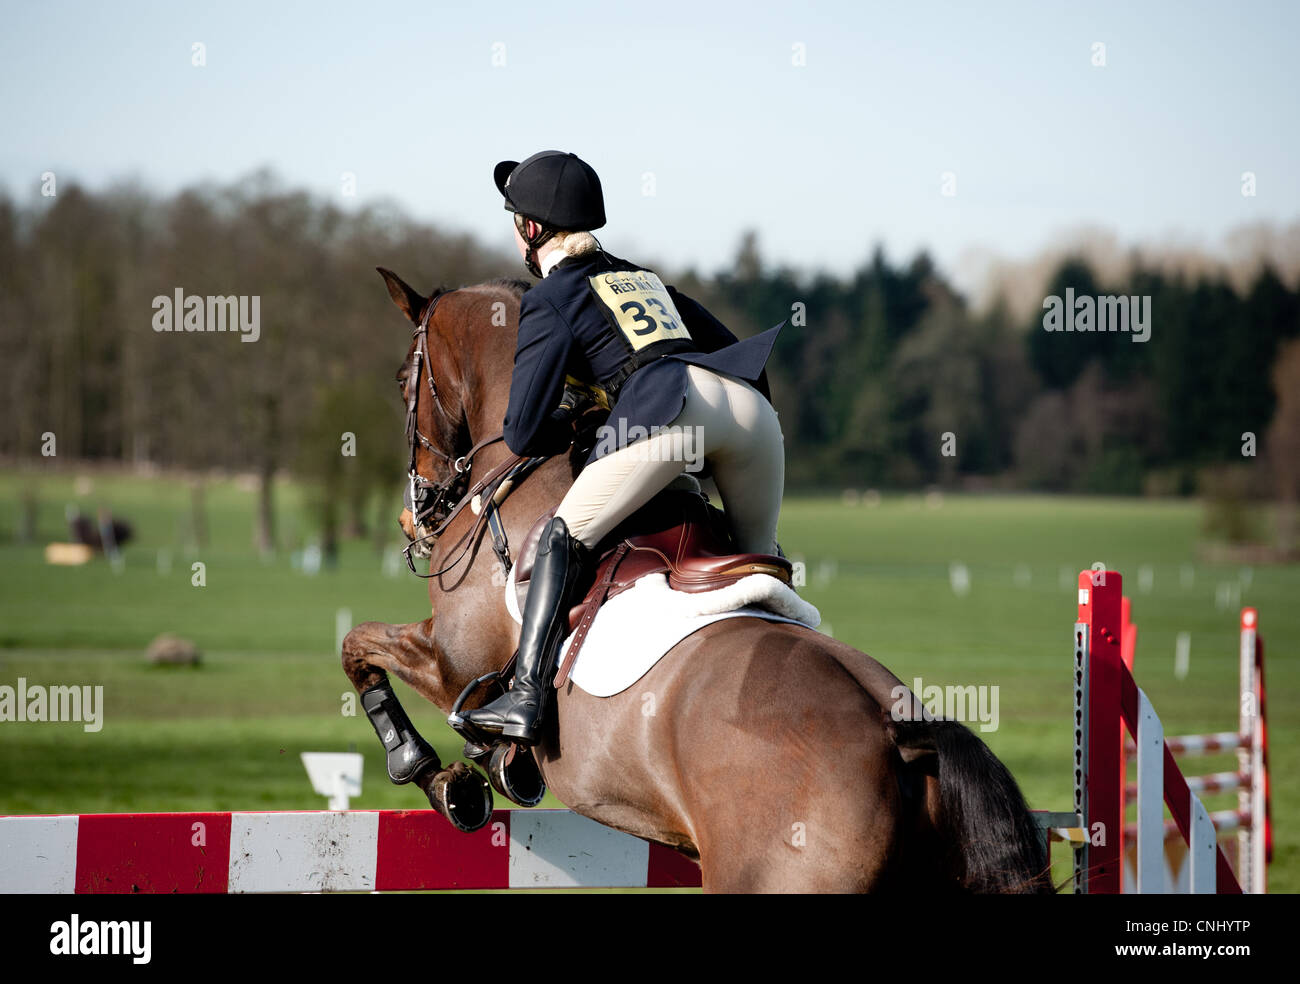 Horse Show Jumping Stock Photo